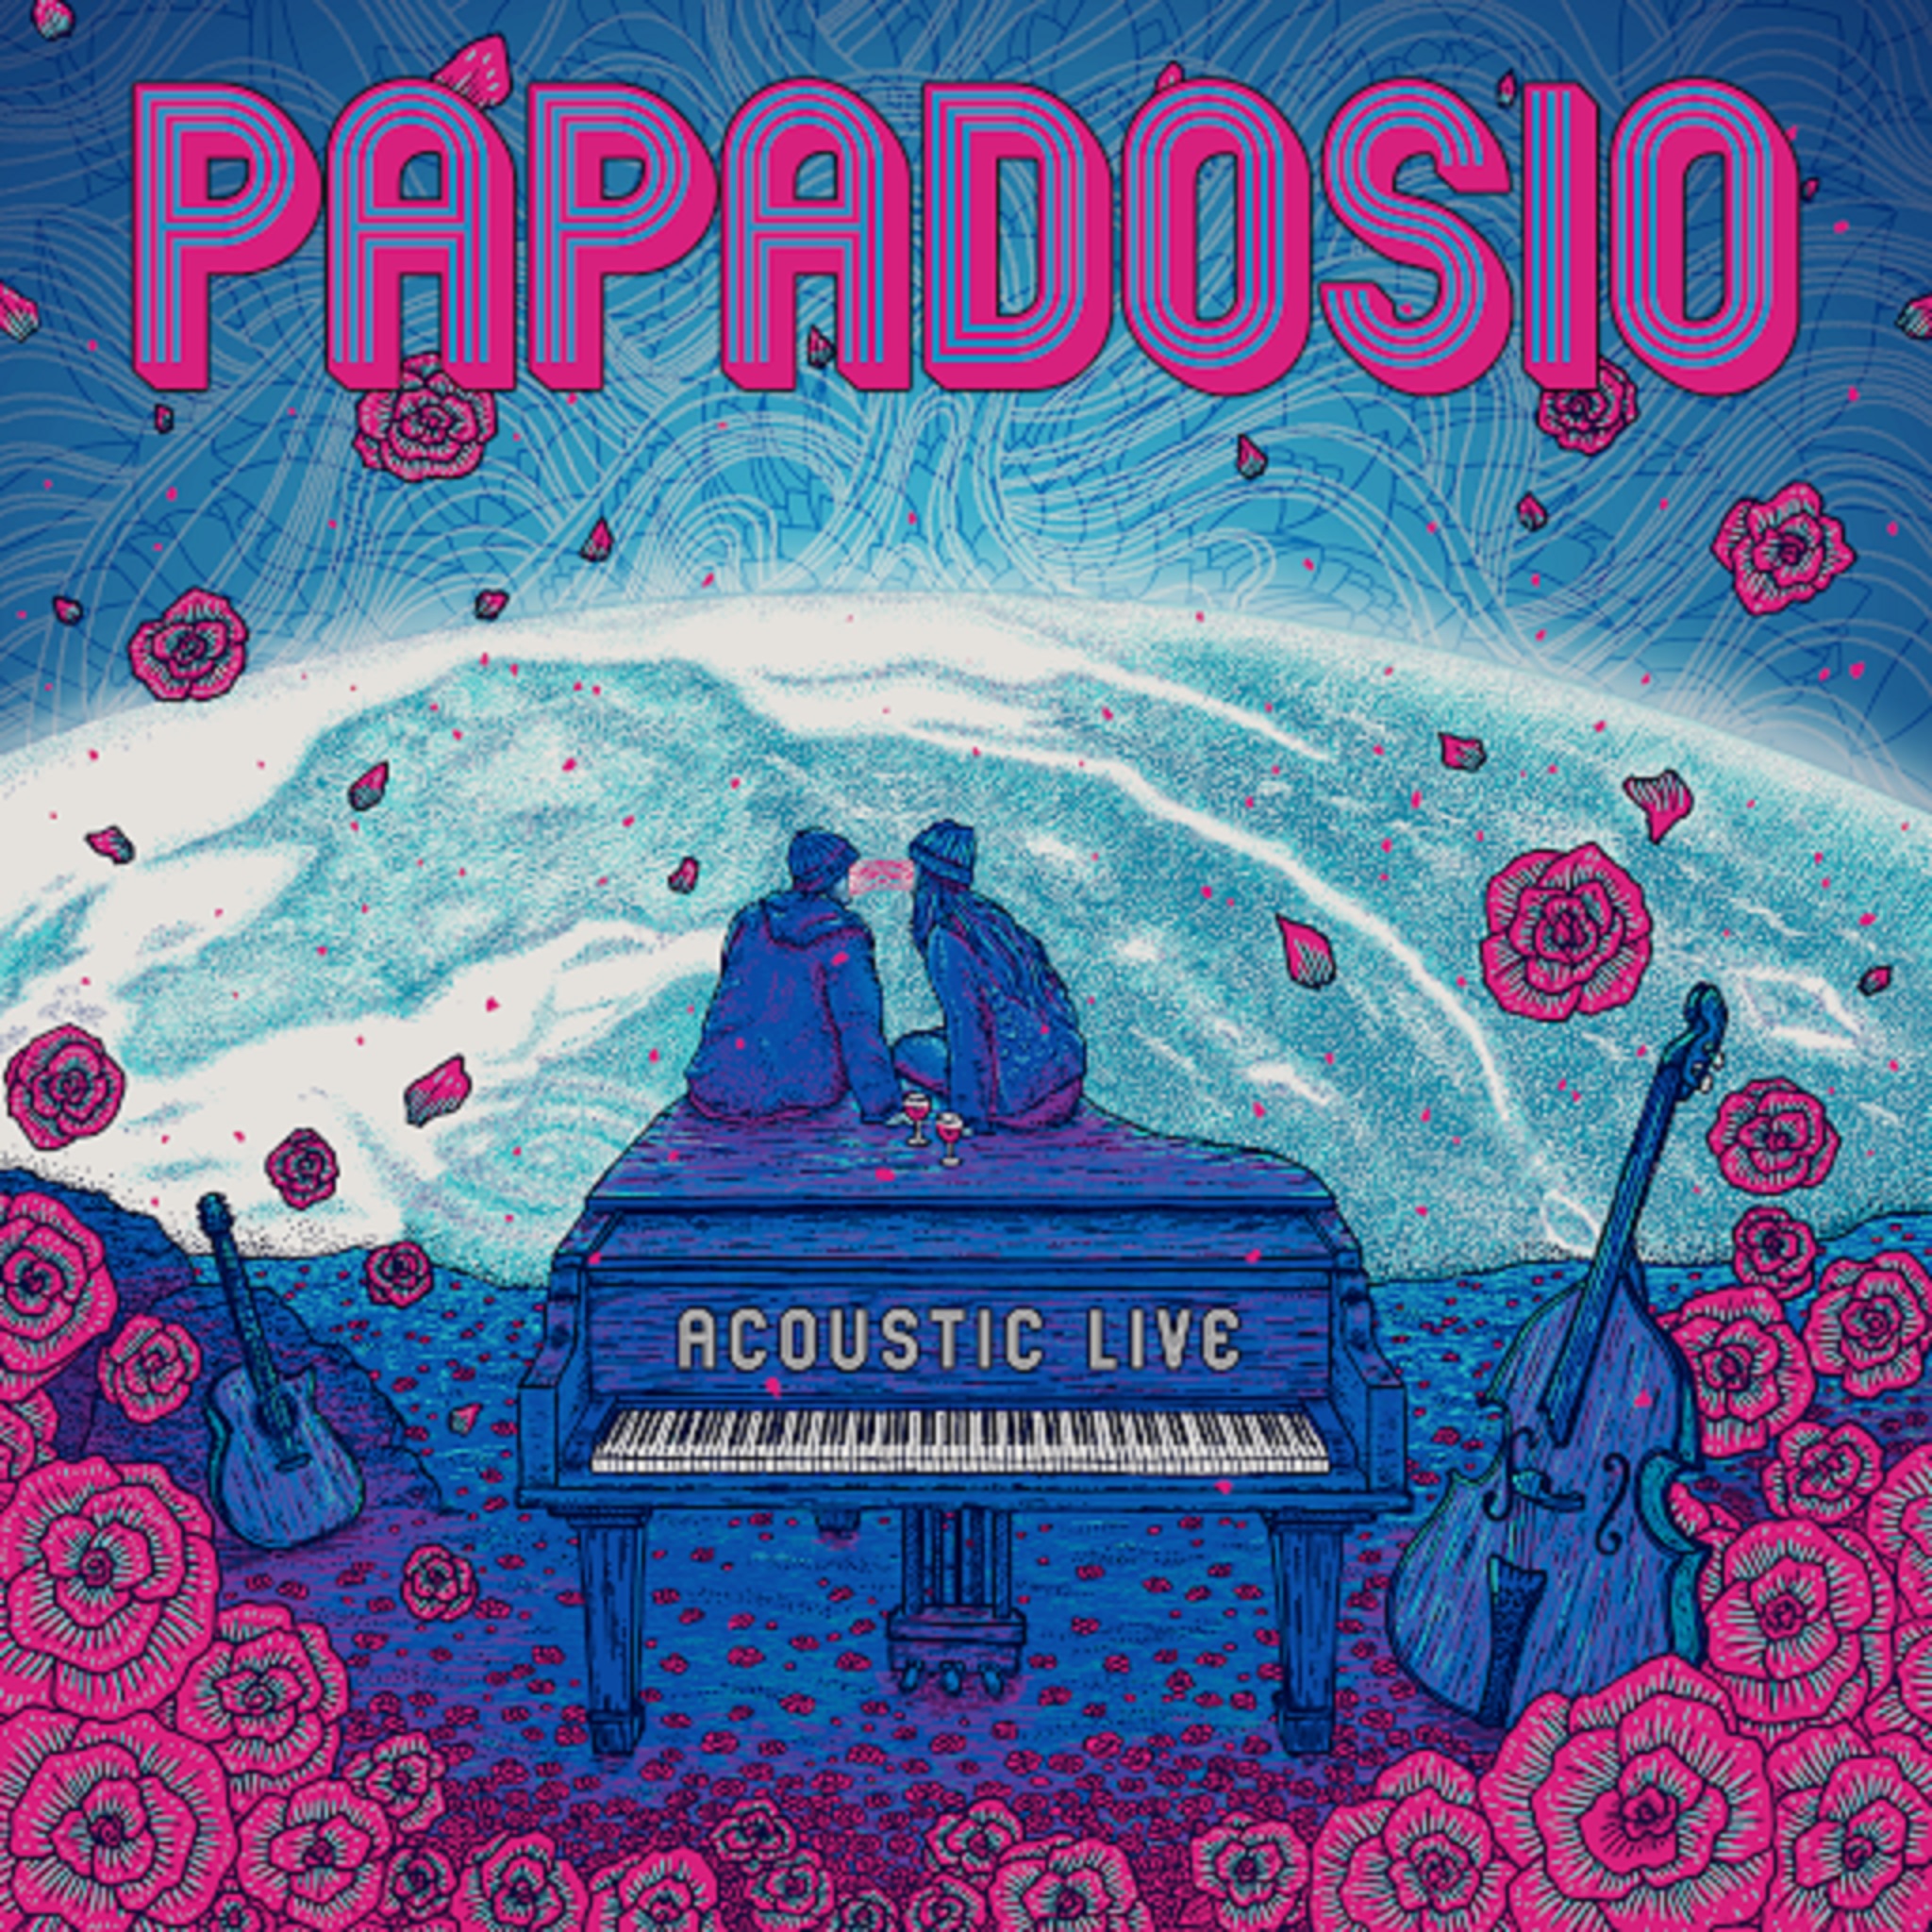 Papadosio Releases "Acoustic Live" Album From City Winery